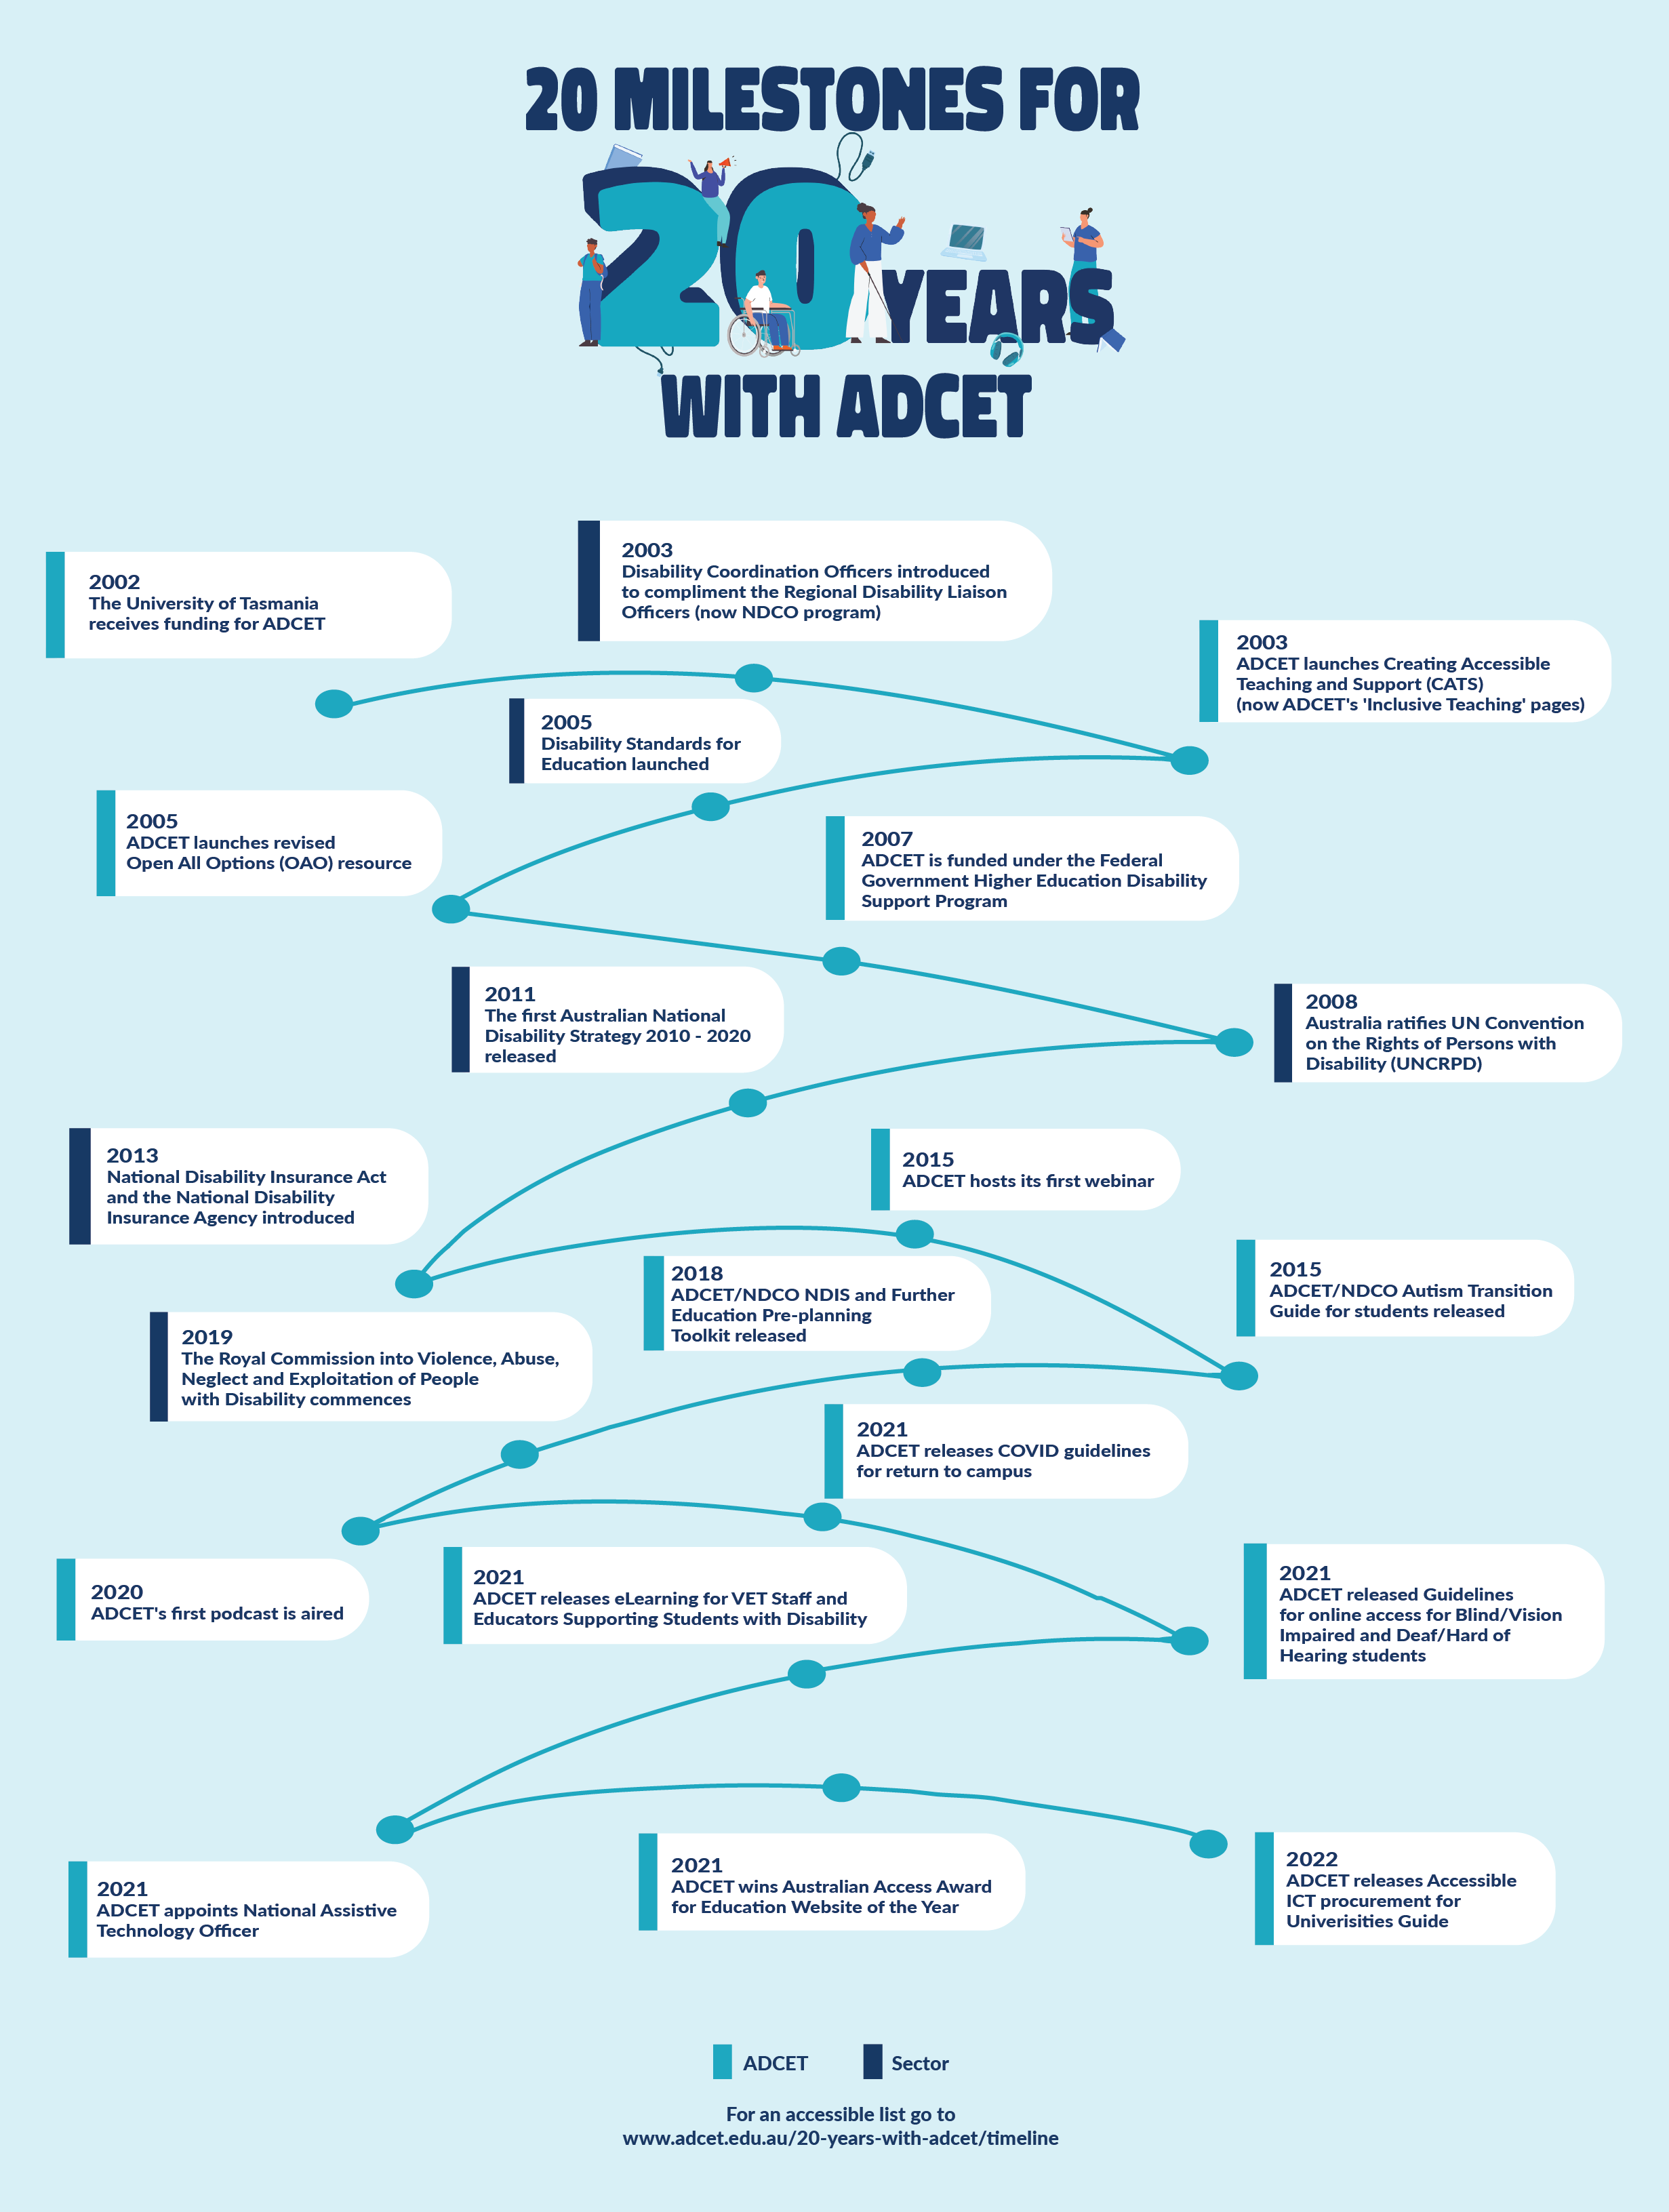 20 years of ADCET timeline infographic